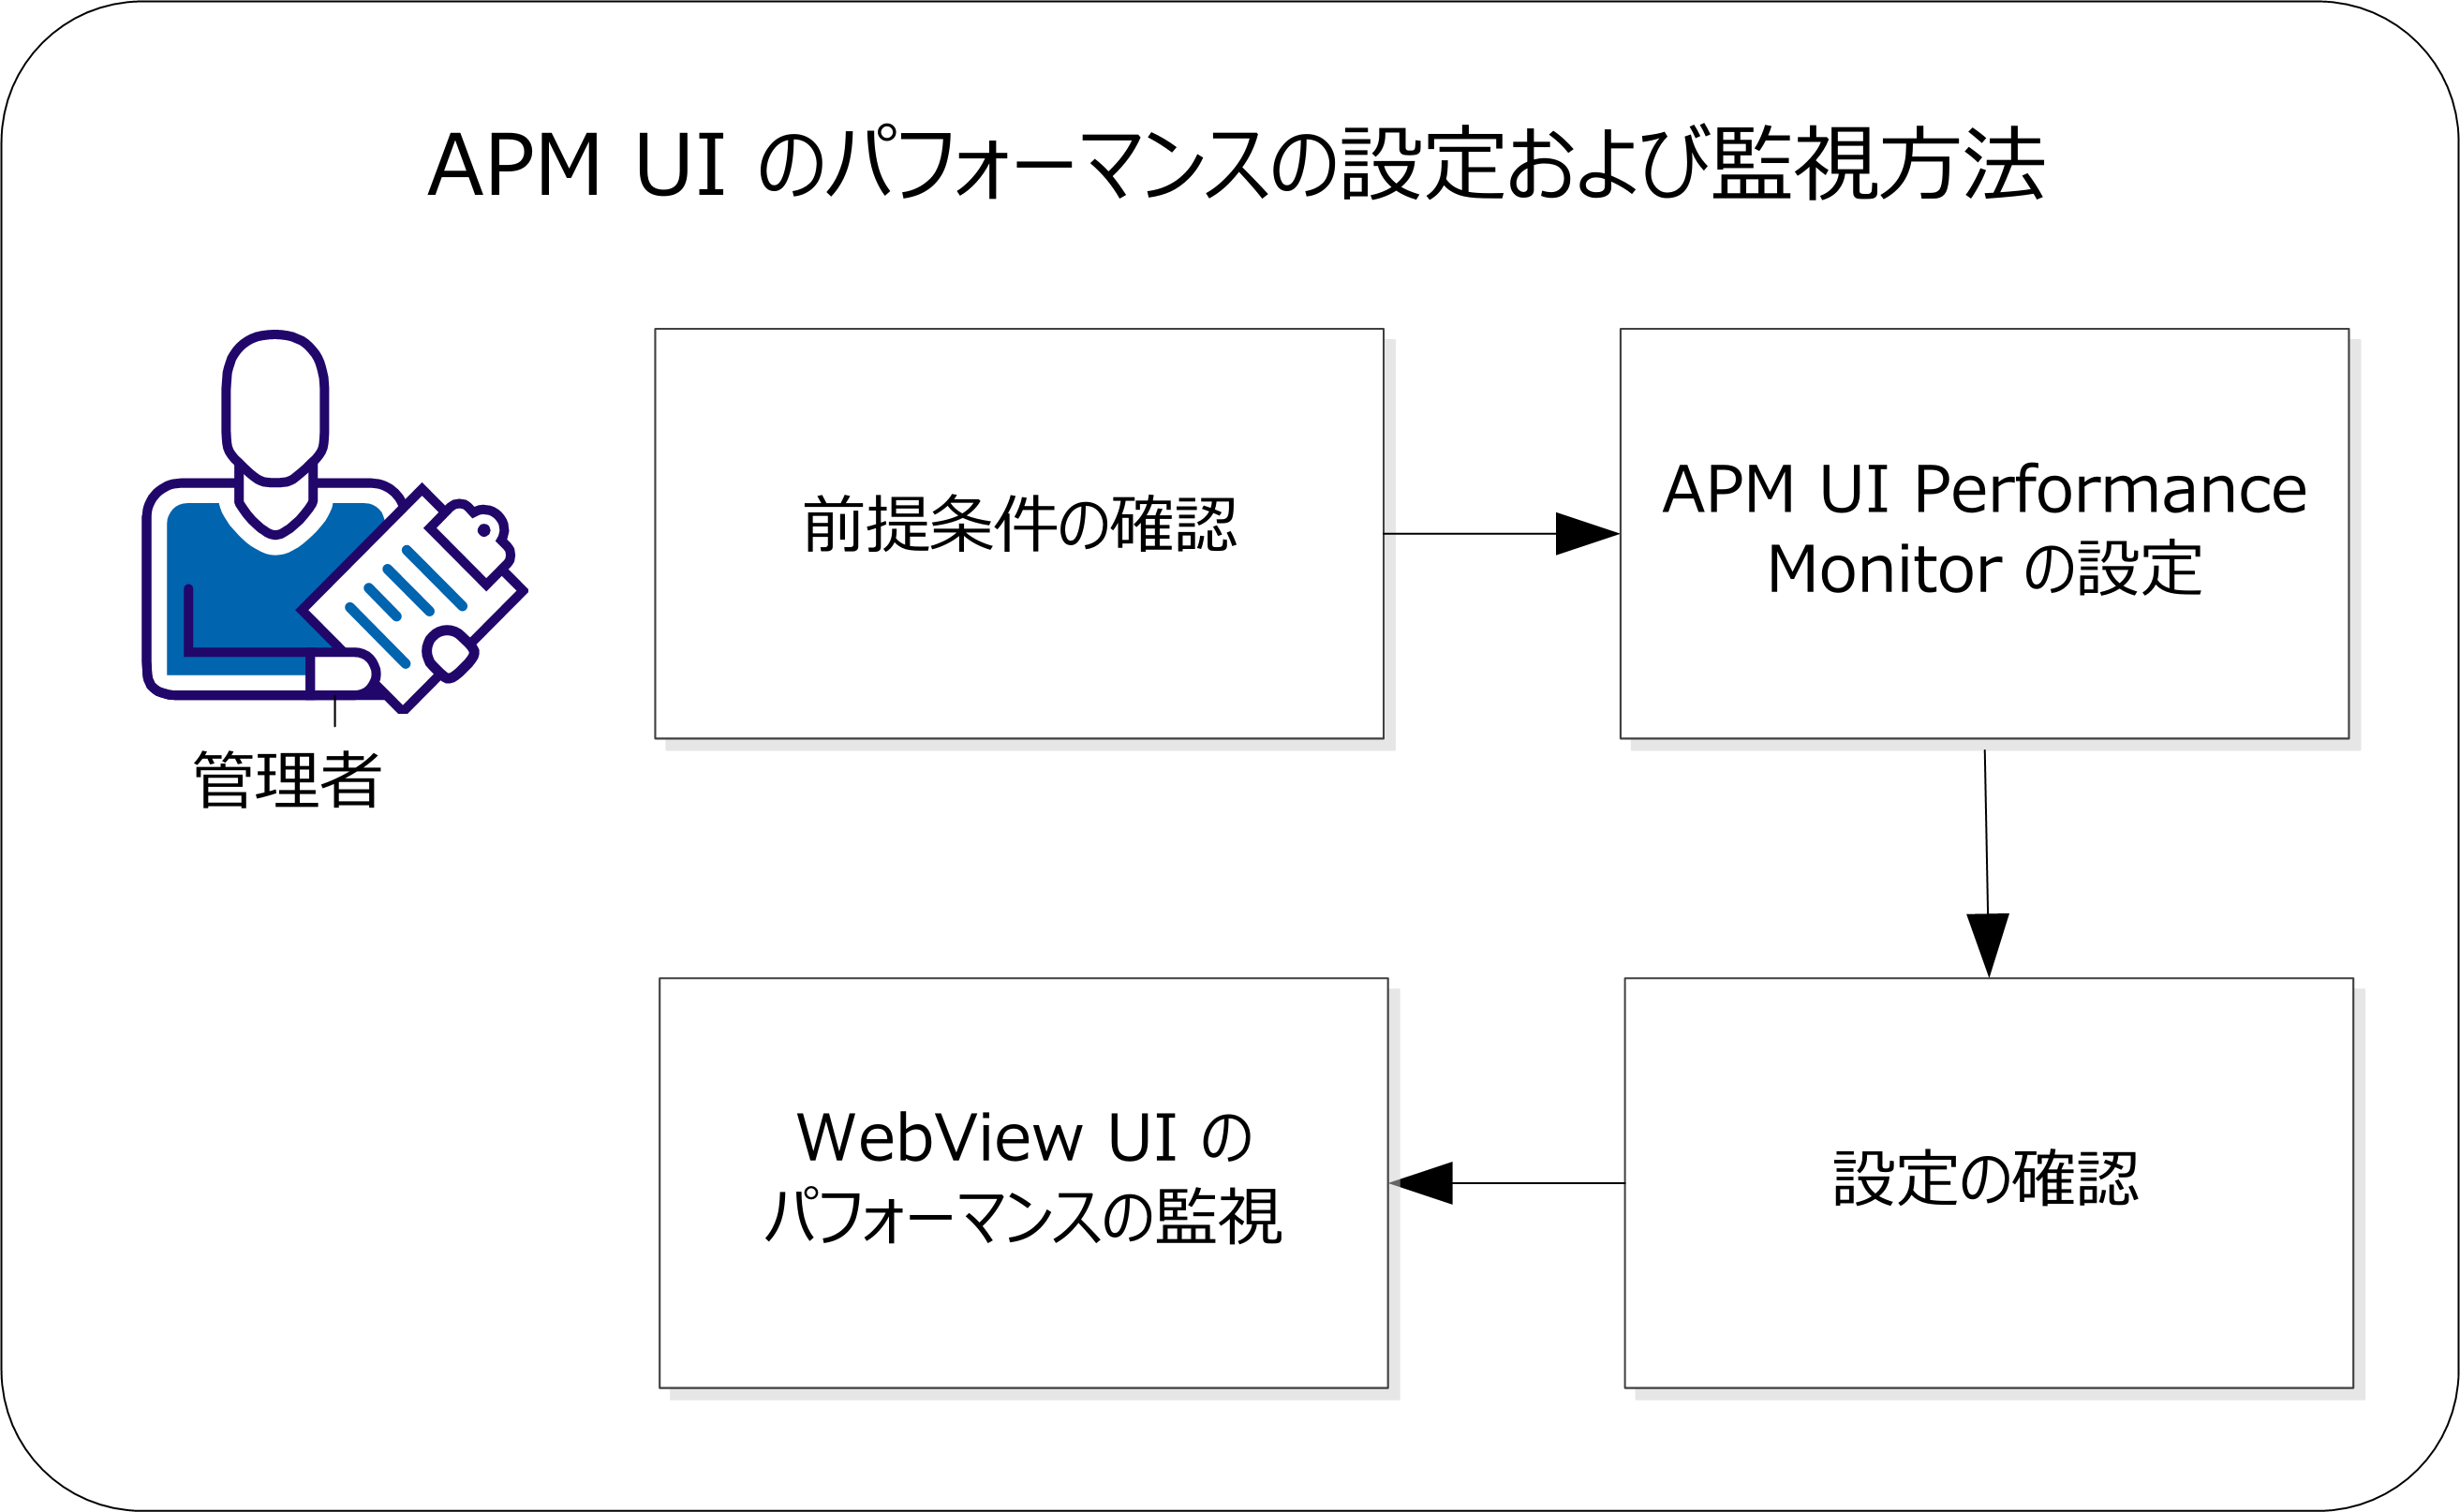 This diagram shows how to configure and monitor APM UI performance.